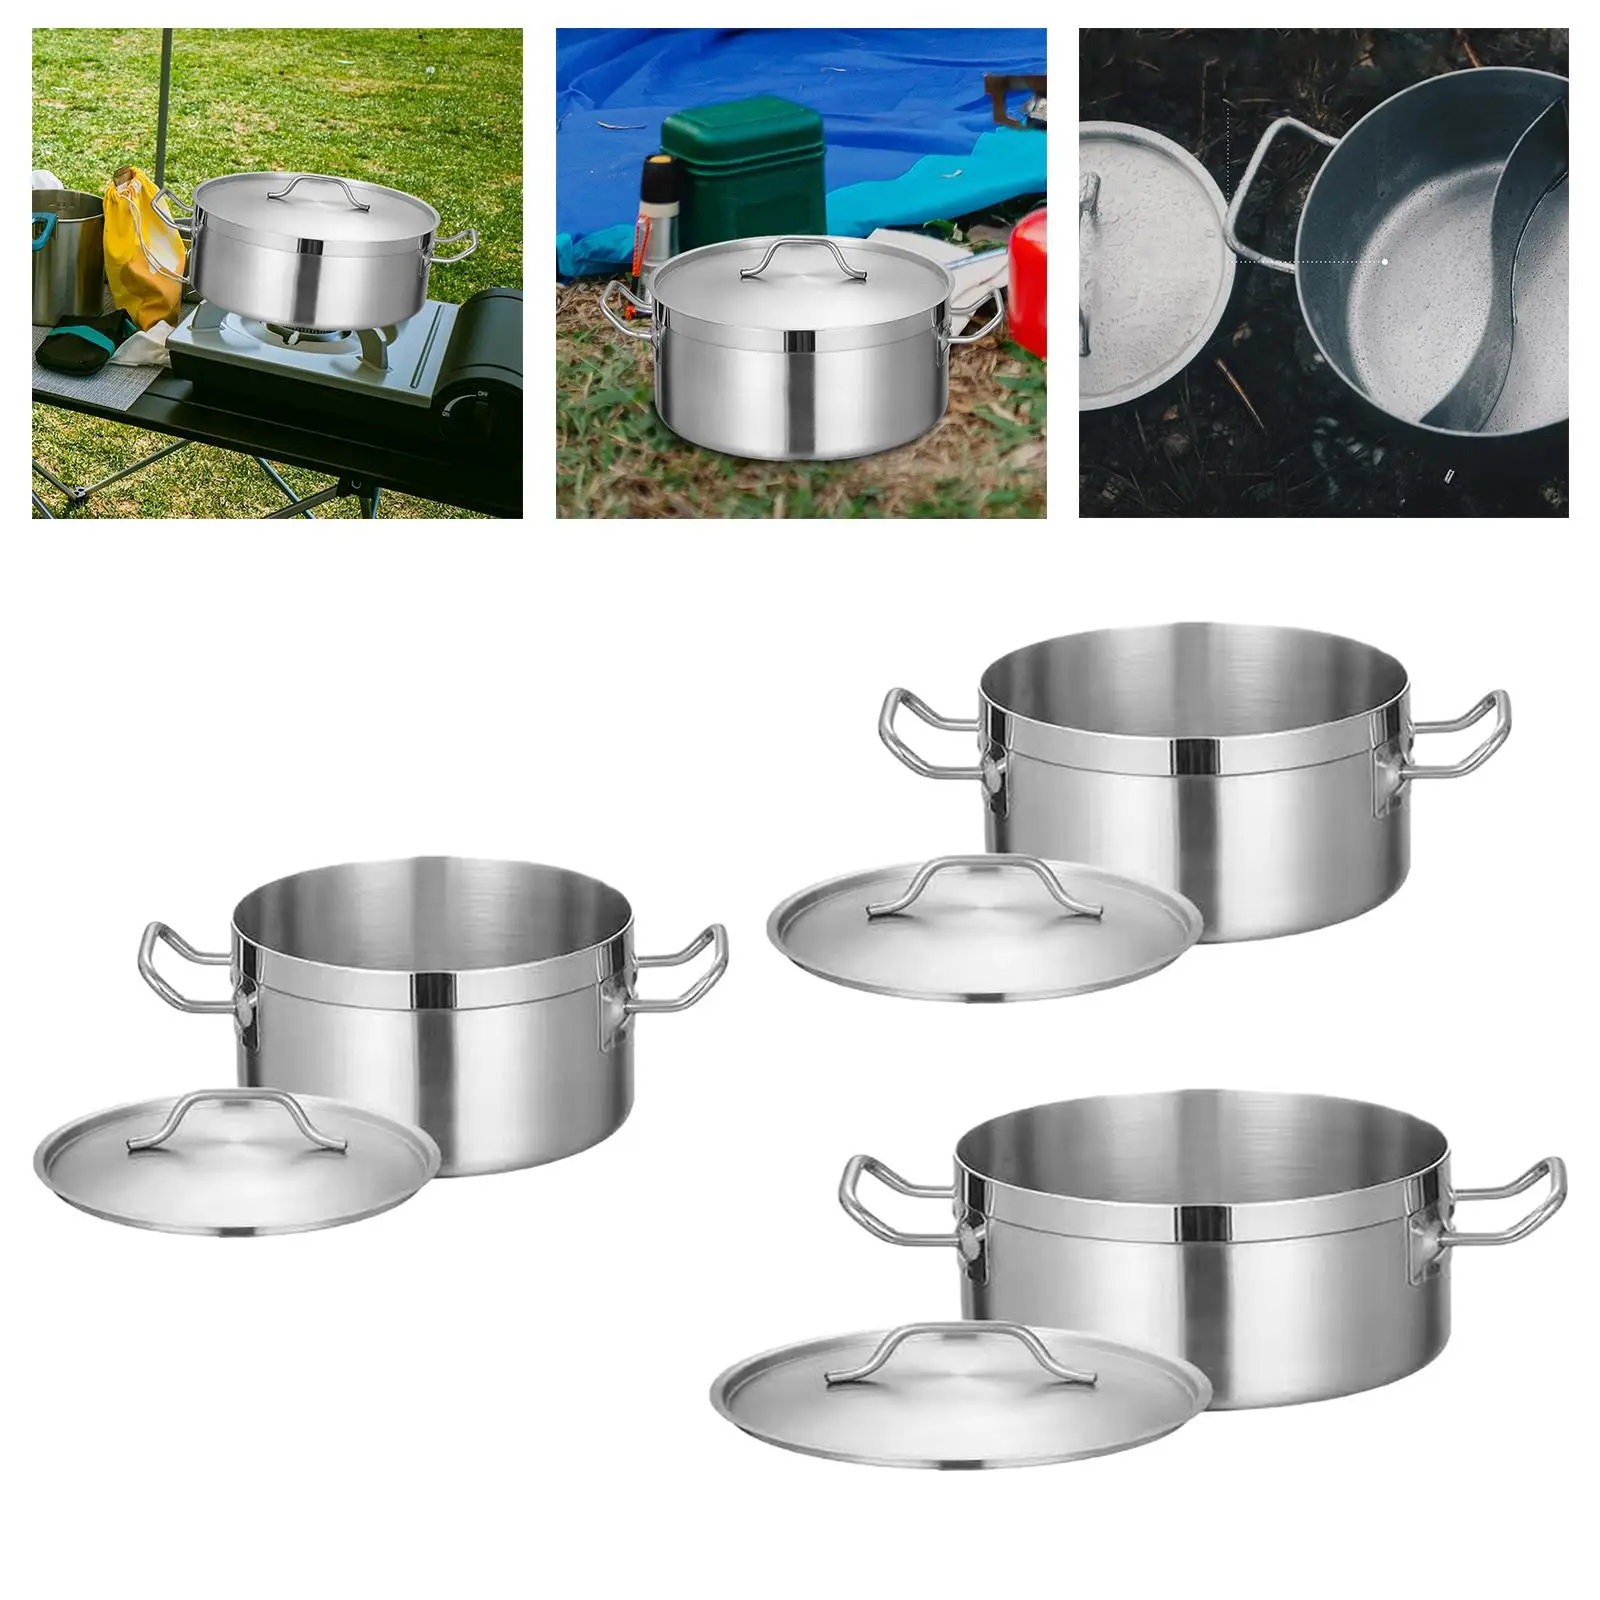 Stainless Steel Stockpot Multipurpose Double Handles Soup Pot Induction Pot for Household Outdoor Camping Commercial Kitchen